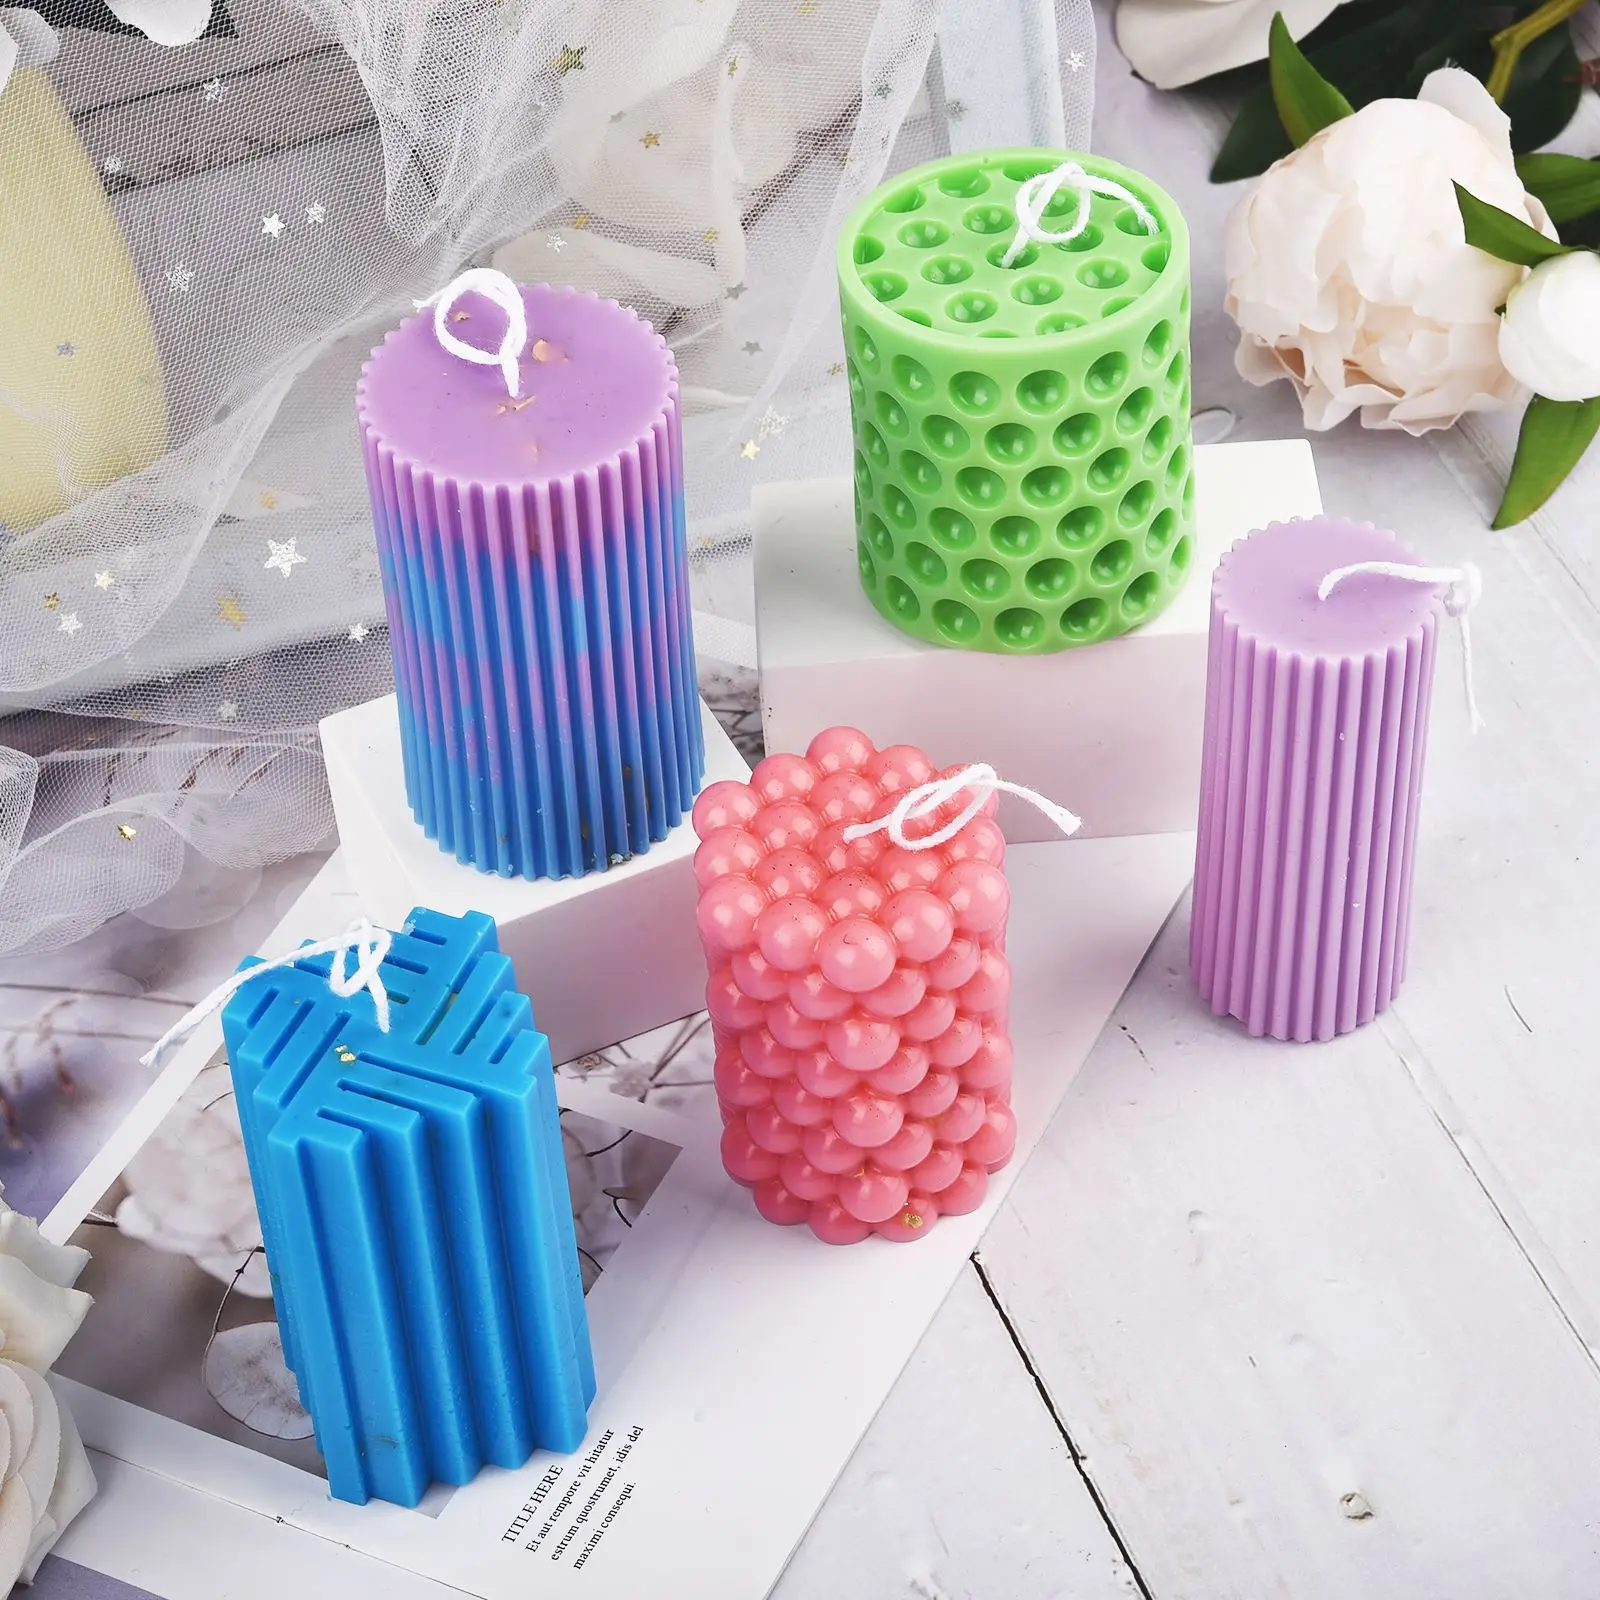 Large Cylinder Silicone Mold for Candle Making DIY Epoxy Resin Molds  Handmade Soap Mousse Cake Baking Home Decoration